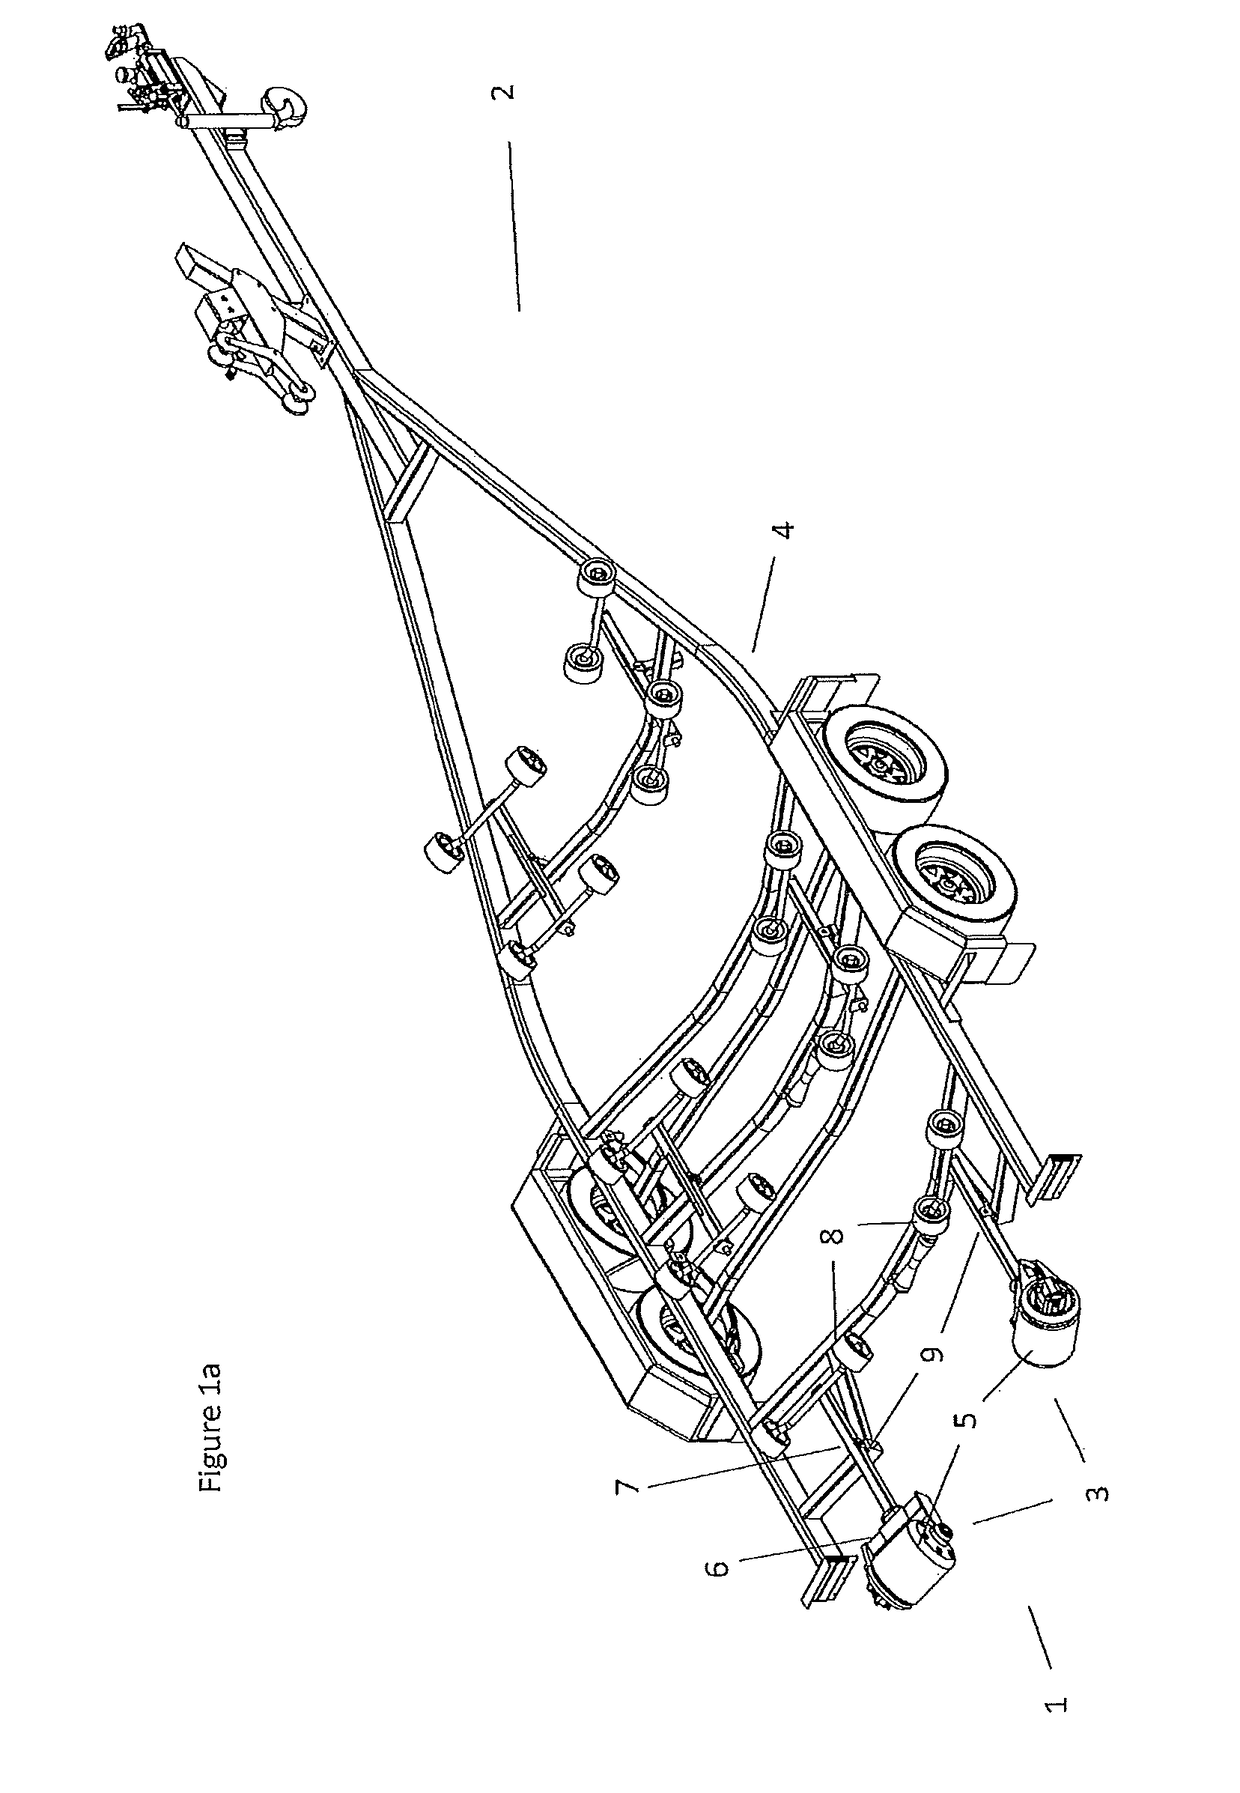 Boat support frame loading and unloading apparatus